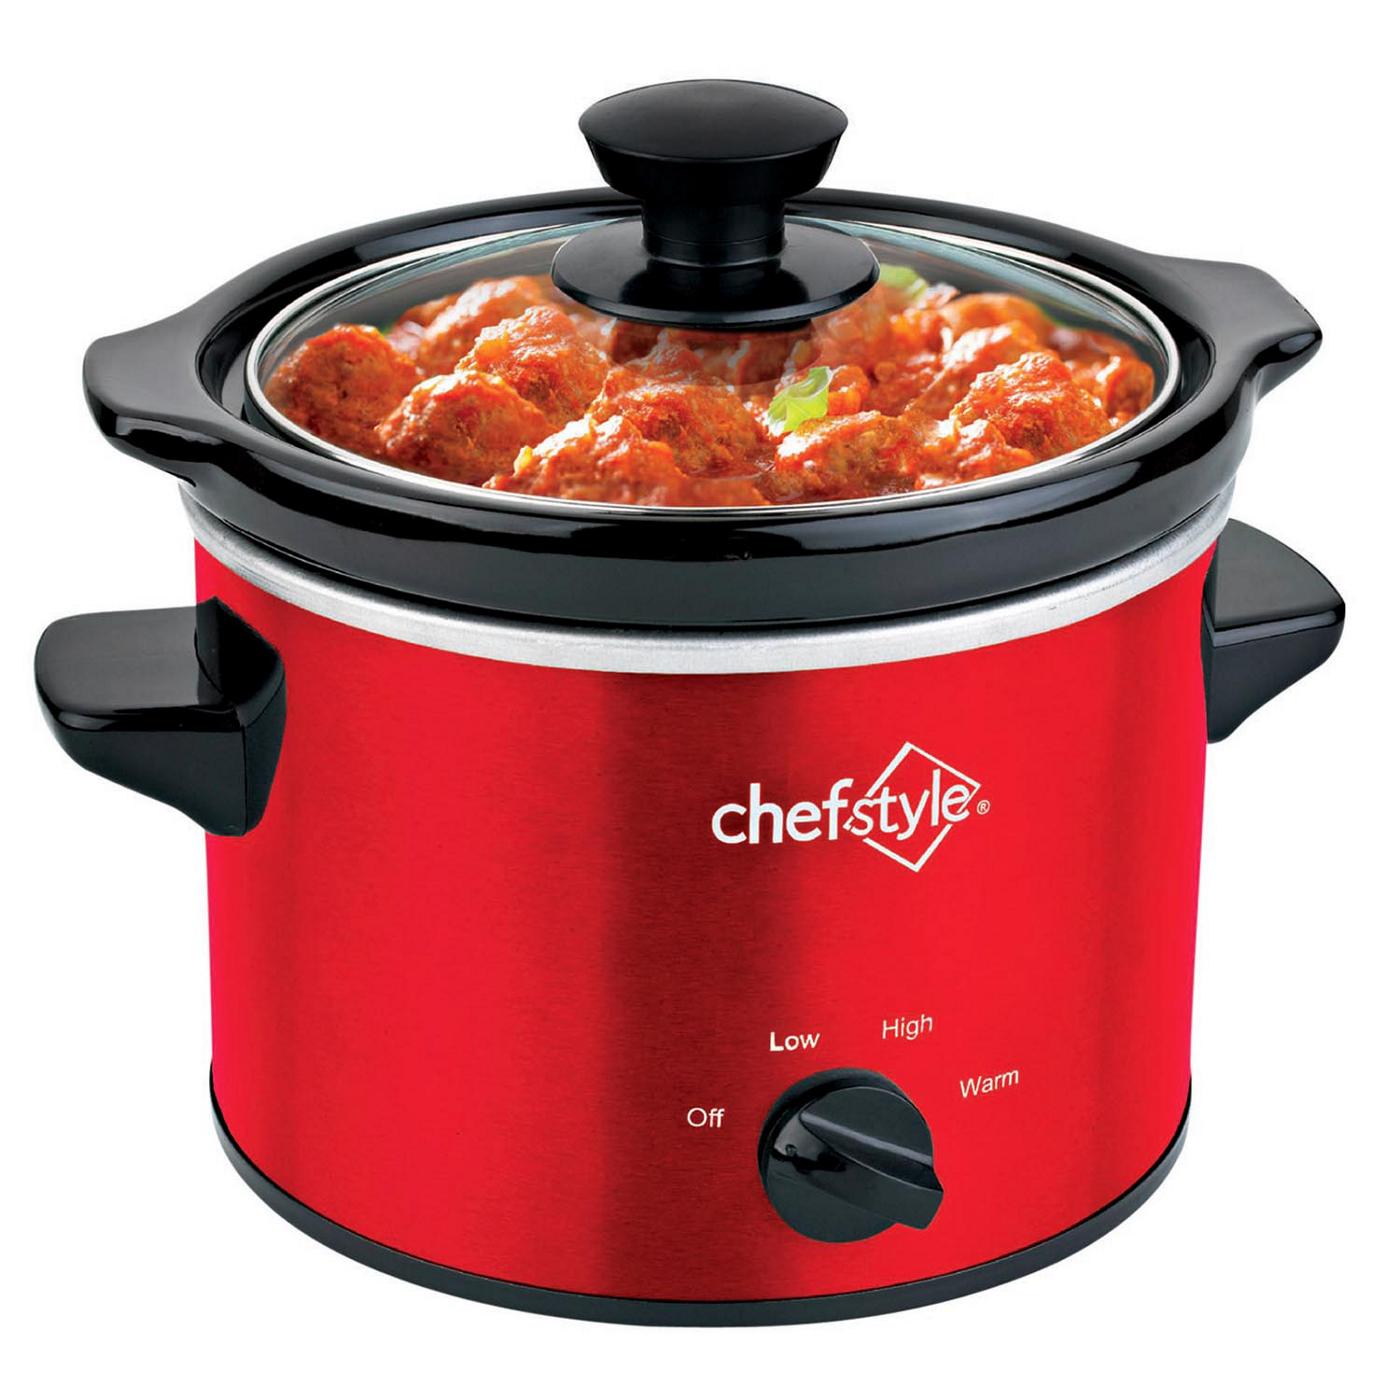 Novella - Dual Slow Cooker- Smart Cook 2 is perfect for all your